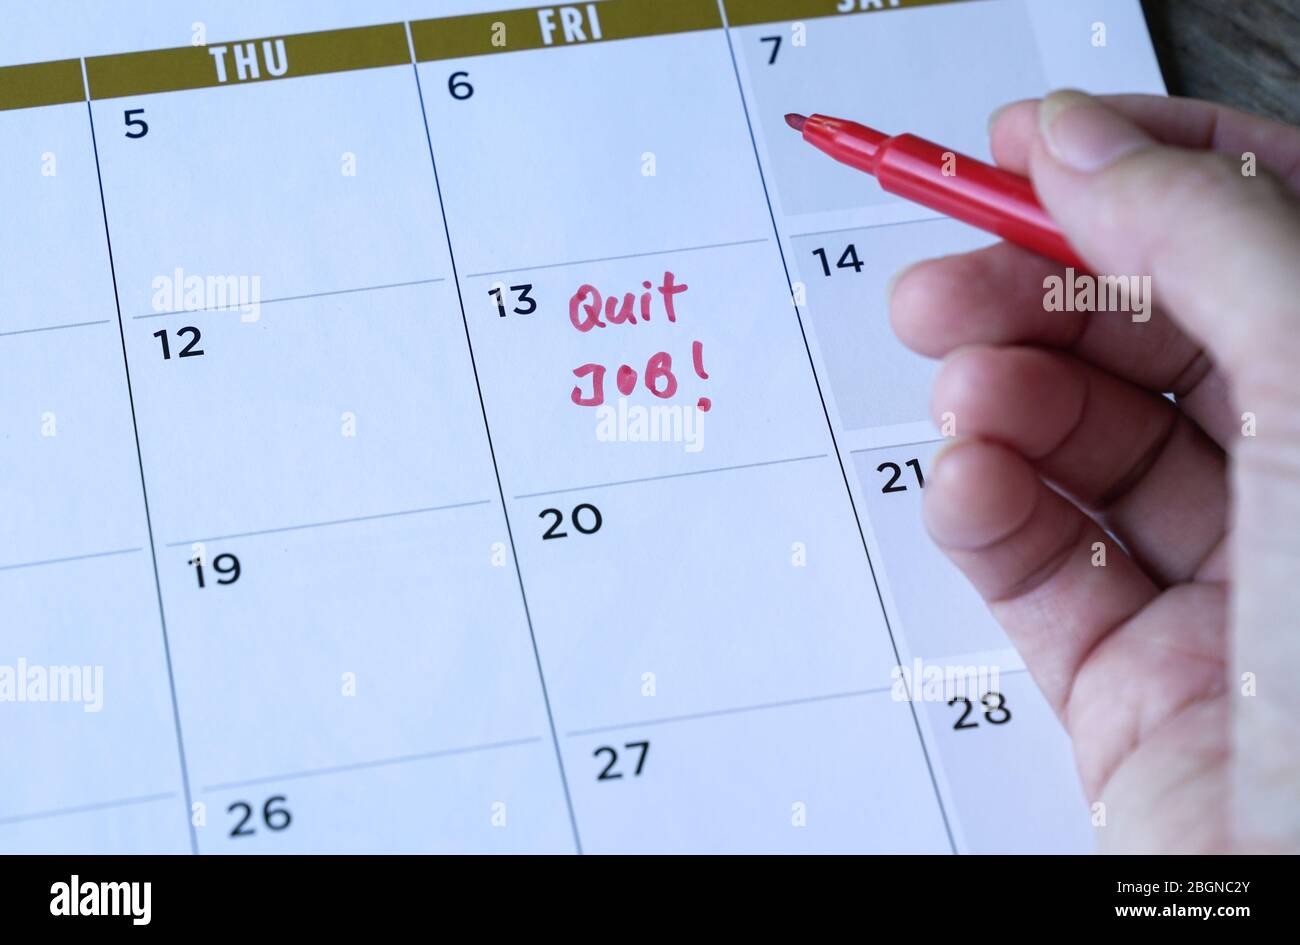 Quit job words written on table calendar with red marker. Employment or careers concept. Stock Photo